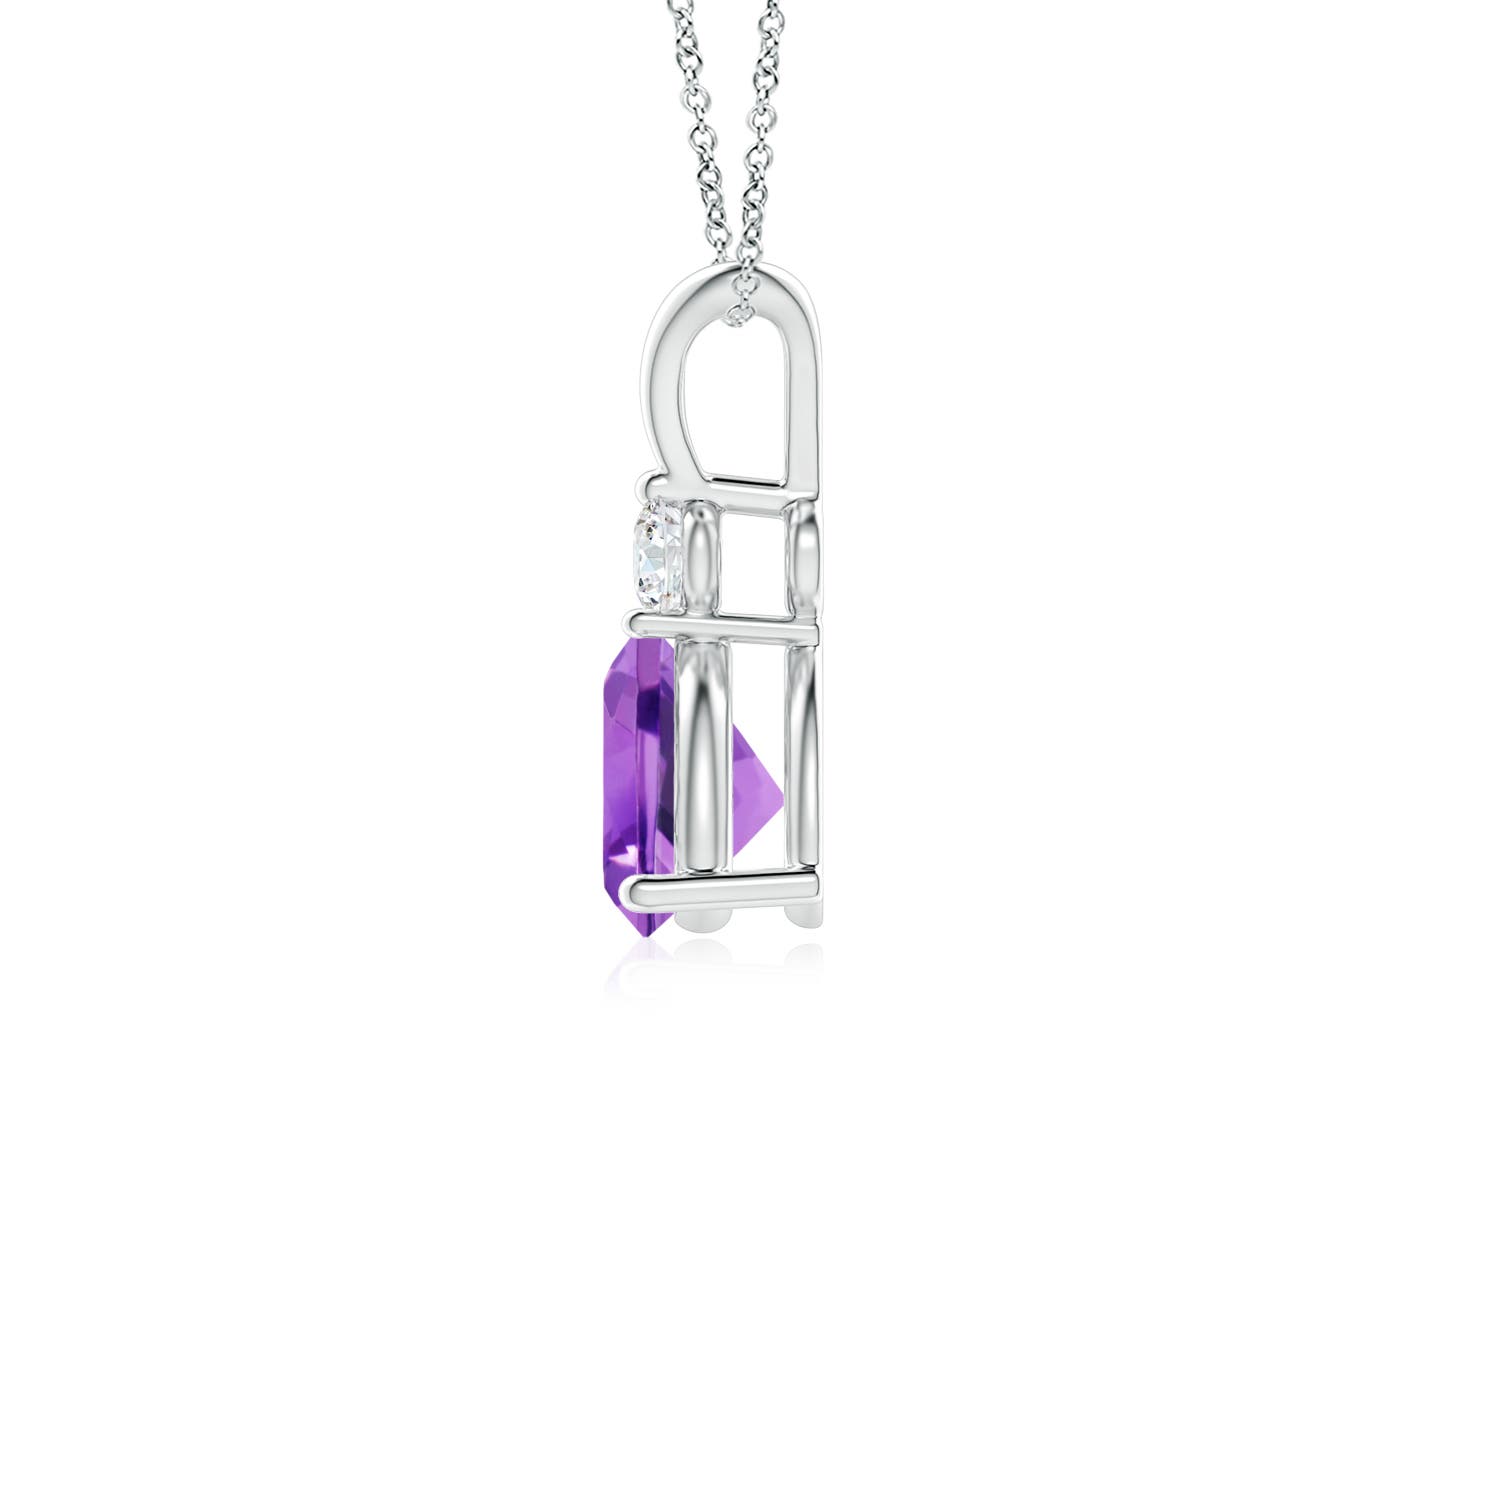 AA - Amethyst / 0.44 CT / 14 KT White Gold